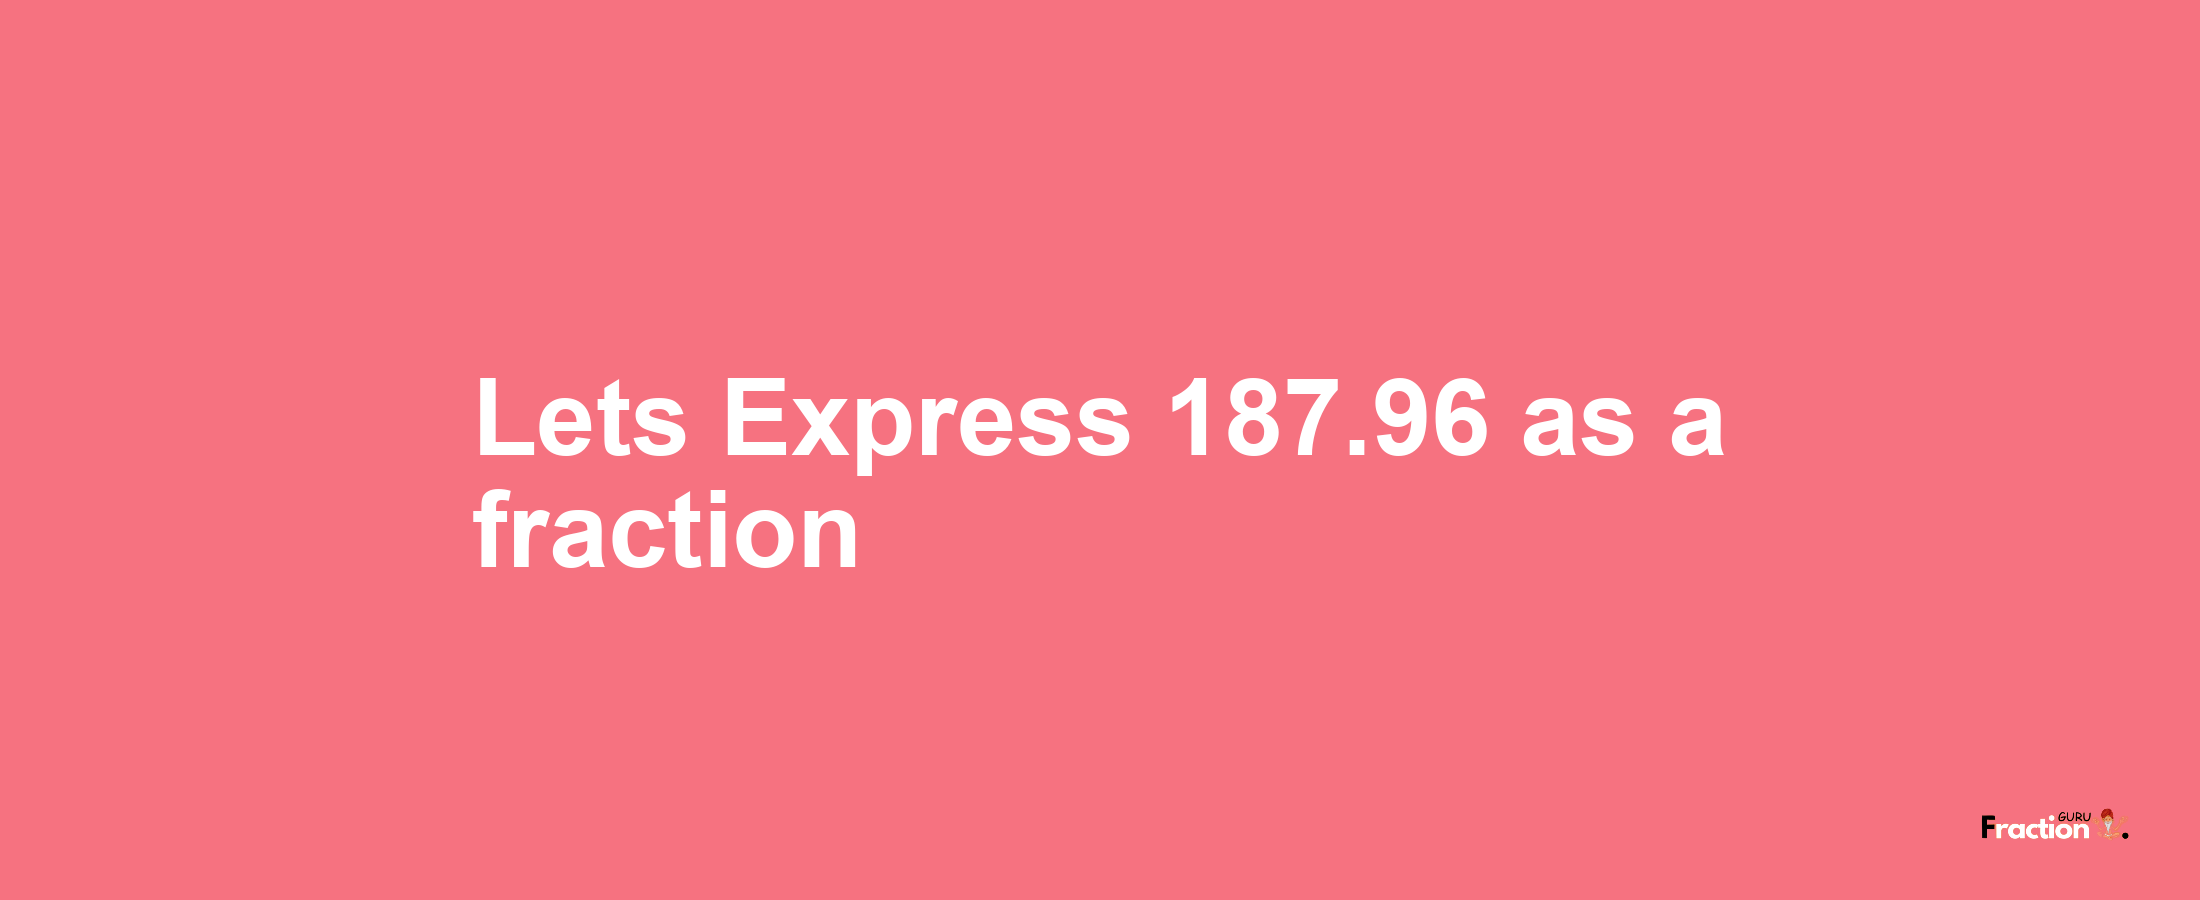 Lets Express 187.96 as afraction